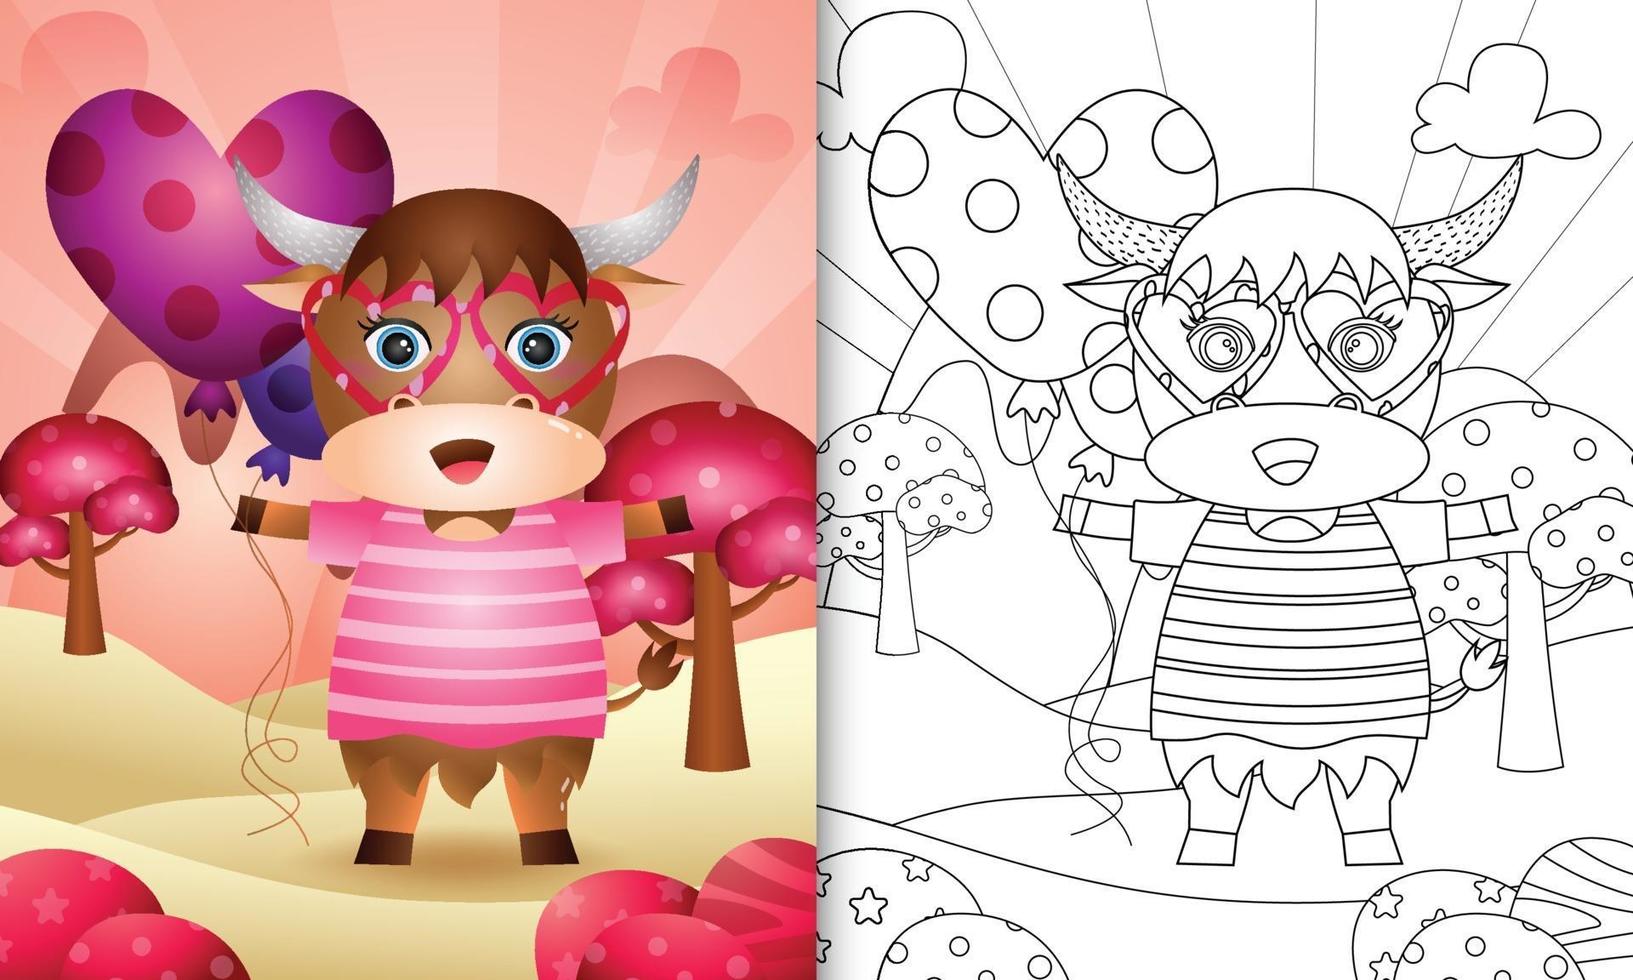 coloring book for kids with a cute buffalo holding balloon for valentine's day vector